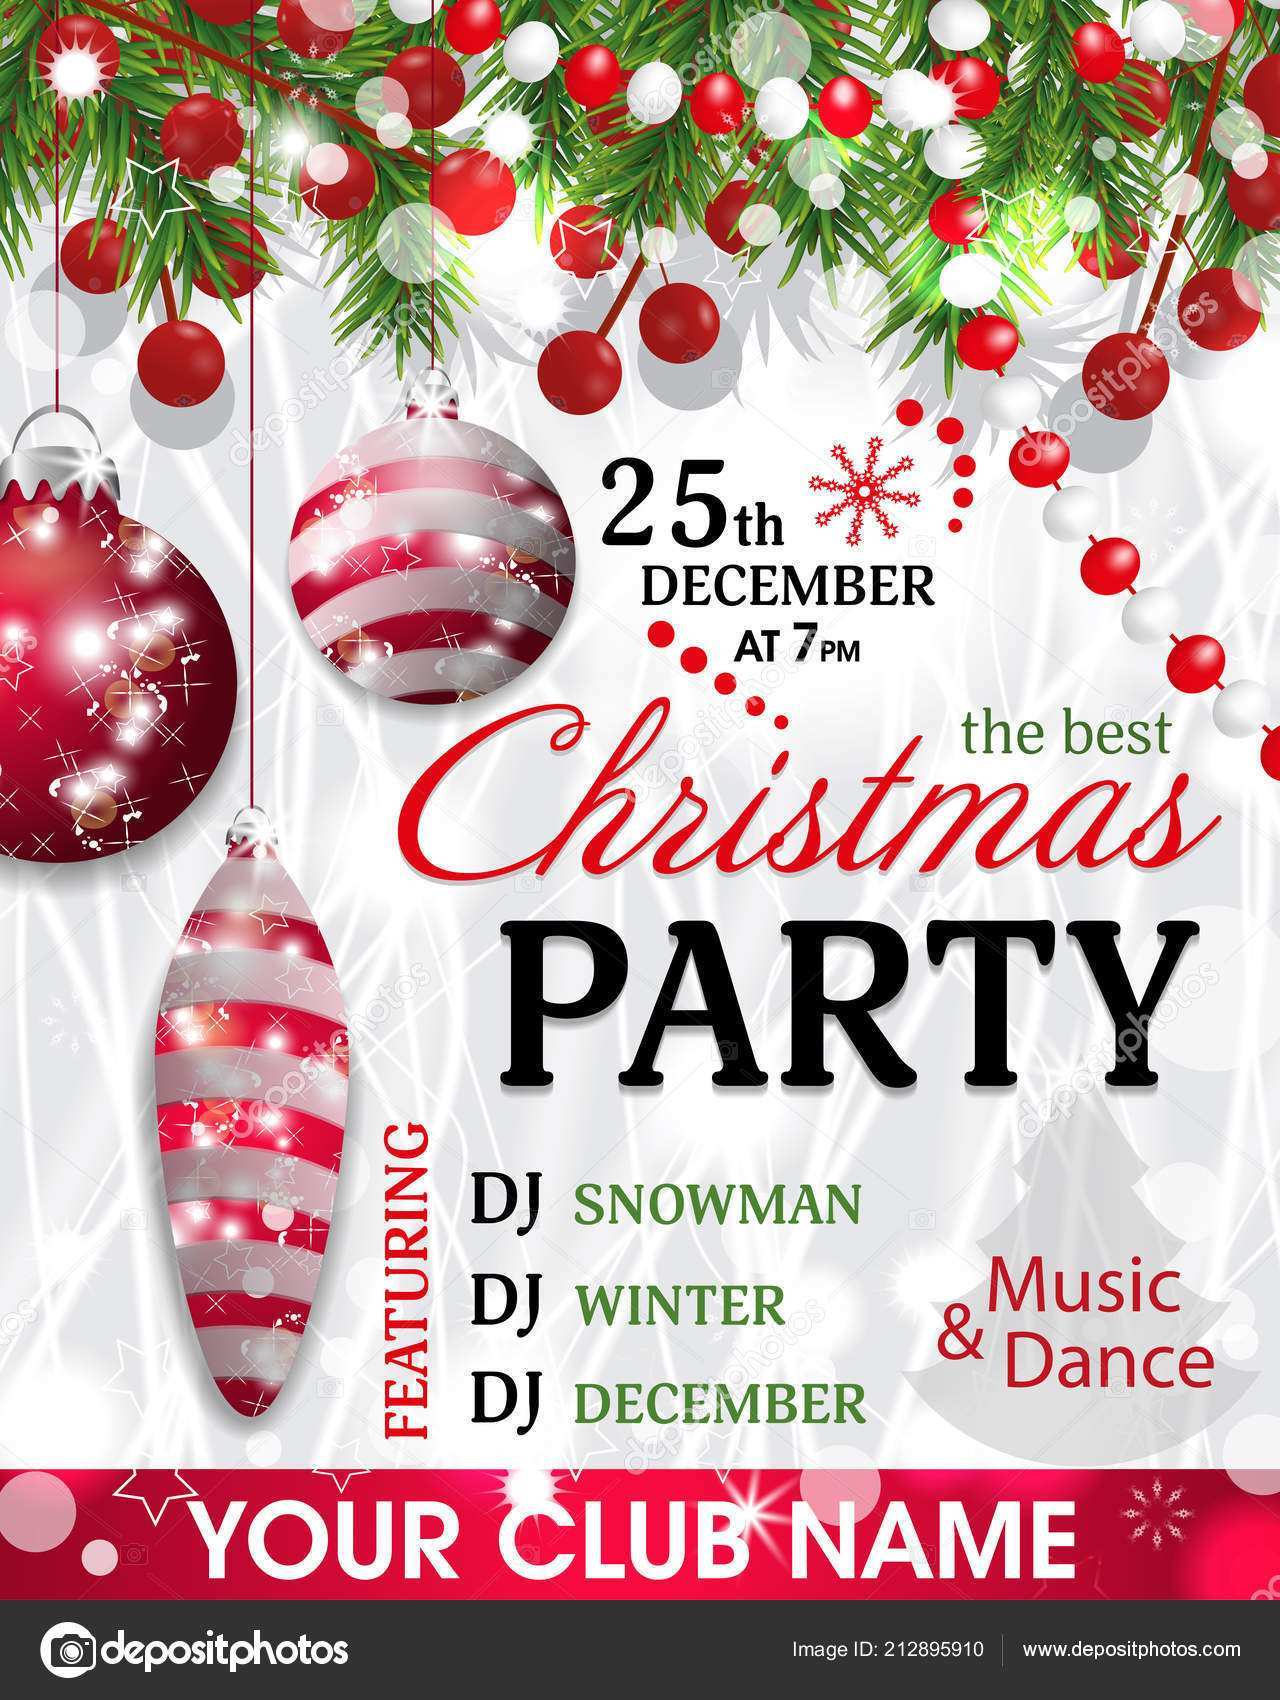 72 Standard Christmas Party Invite Template Uk Photo with Christmas Party Invite Template Uk